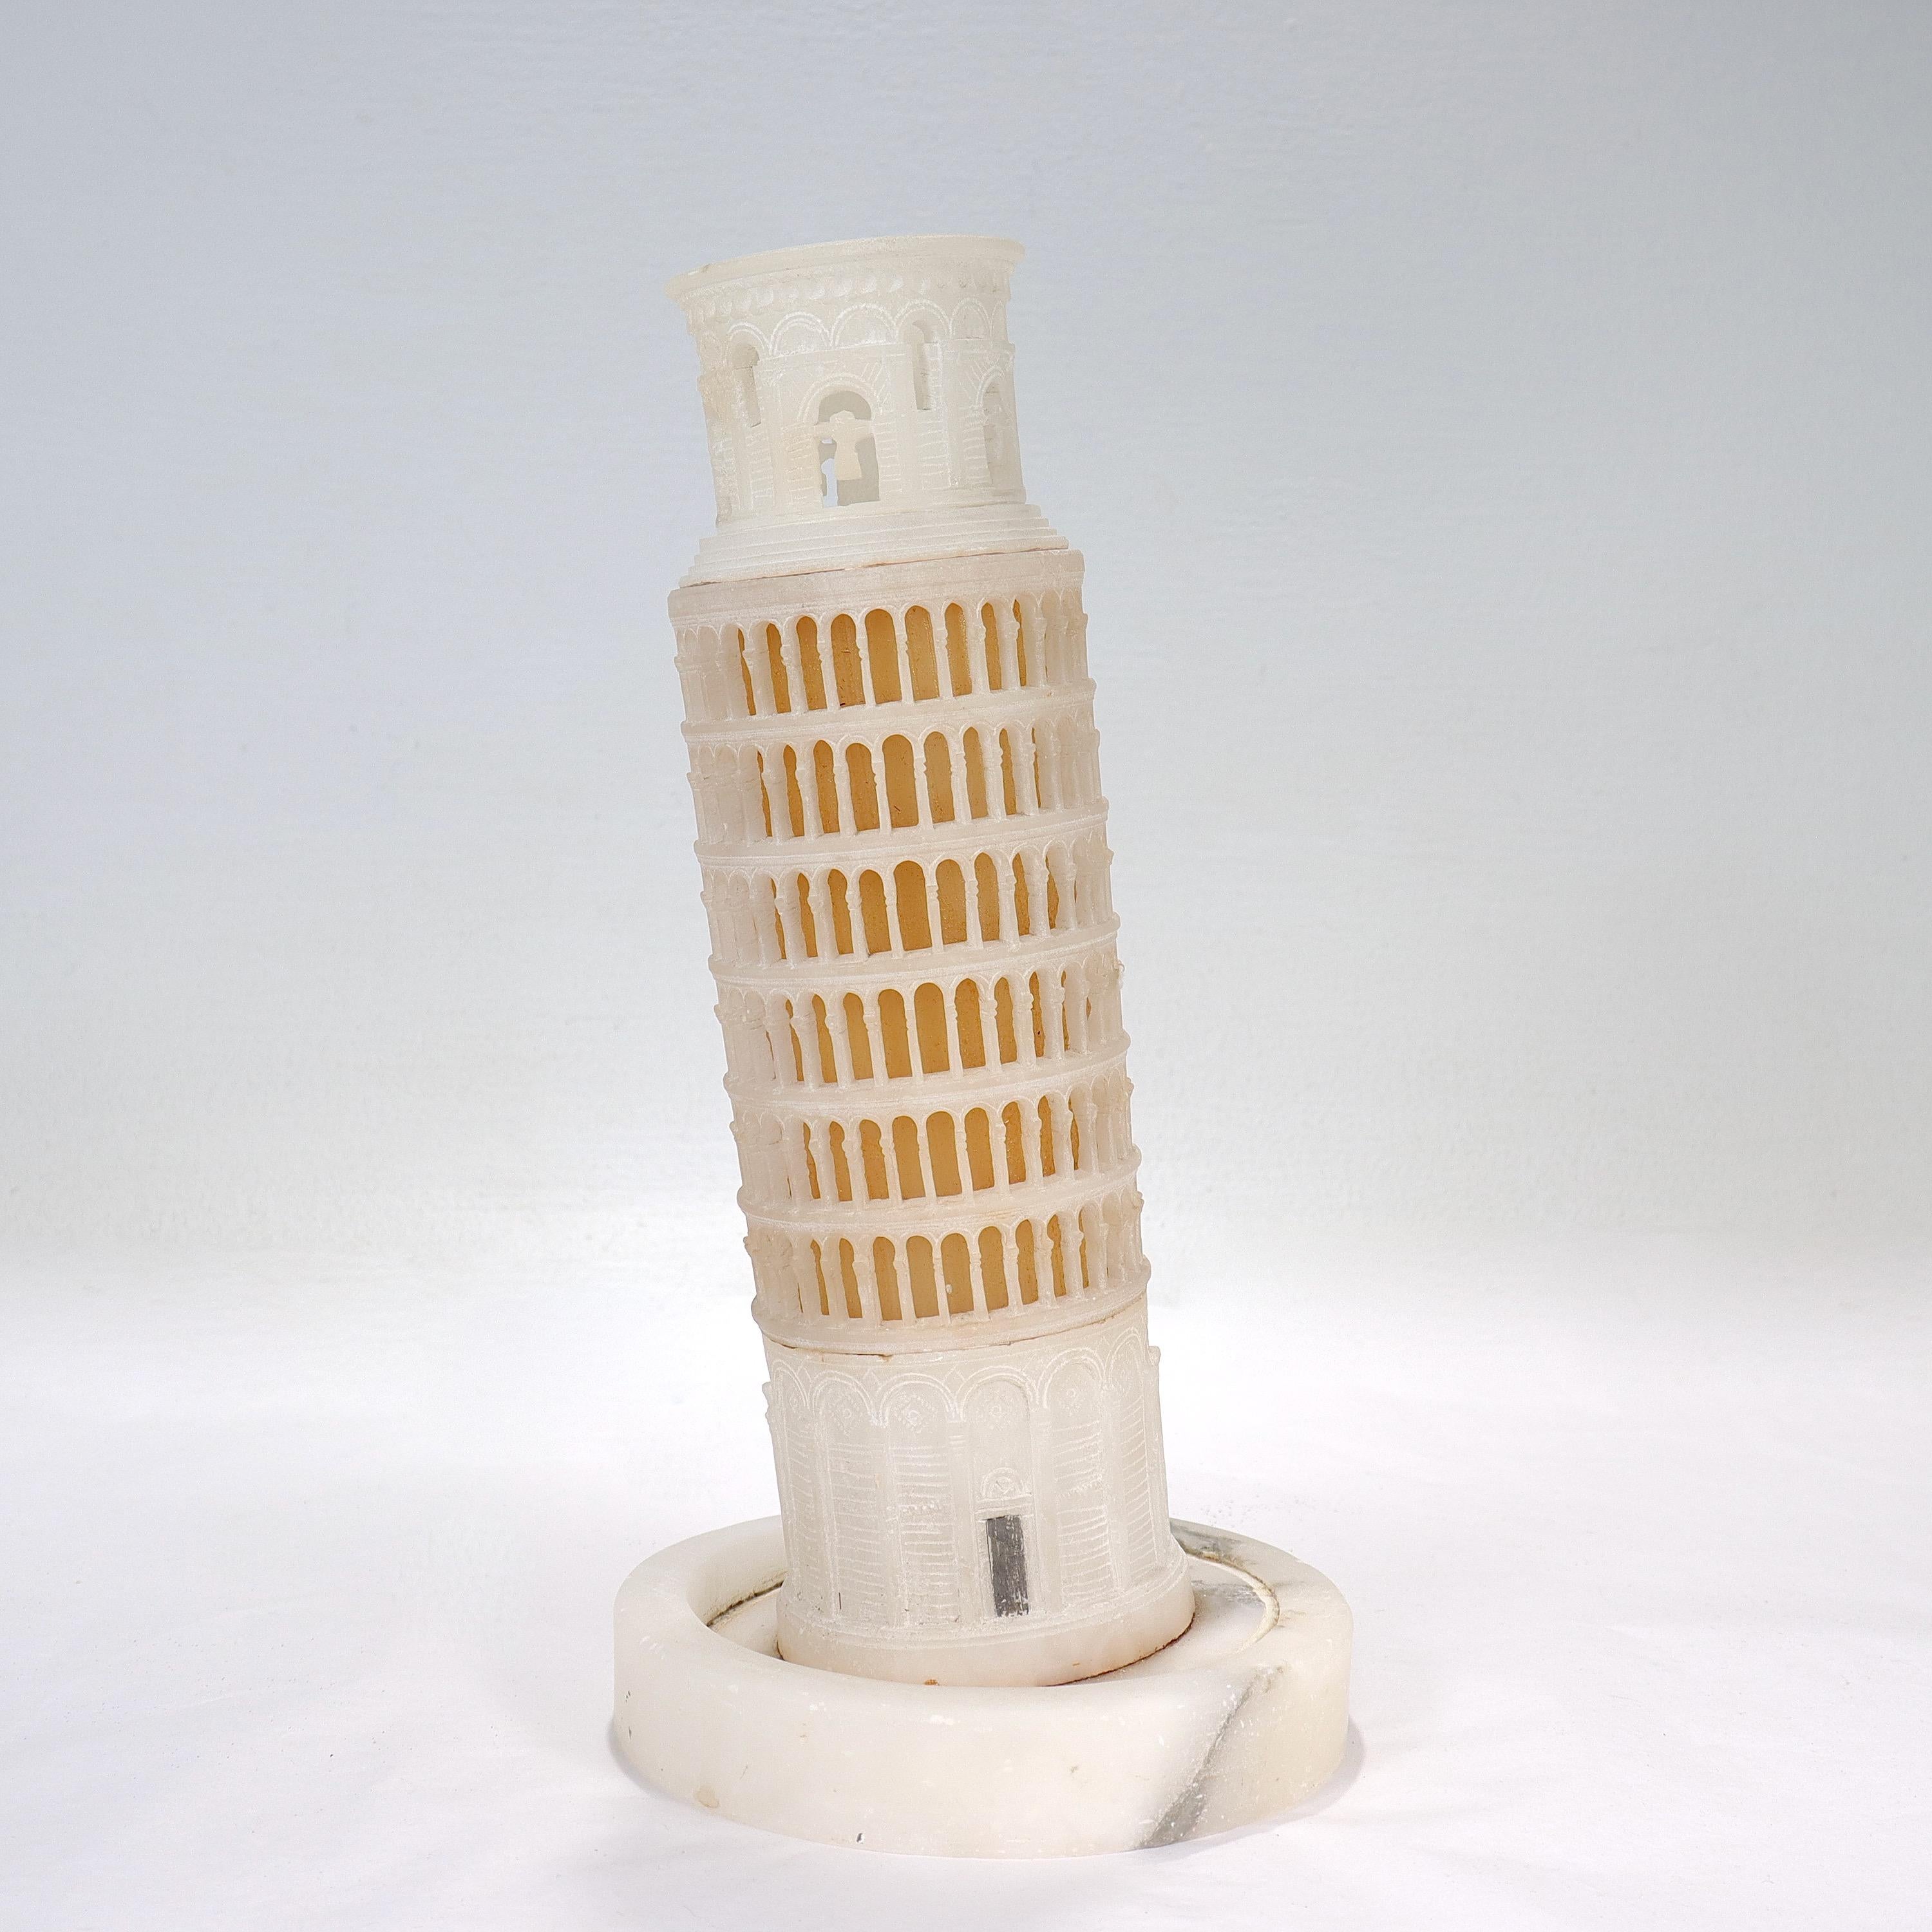 A fine Grand Tour style alabaster sculpture.

In the form of the Leaning Tower of Pisa atop a circular plinth. 

Simply a great model of the Ancient World's Wonders!

Date:
20th Century or earlier

Overall Condition:
It is in overall fair,